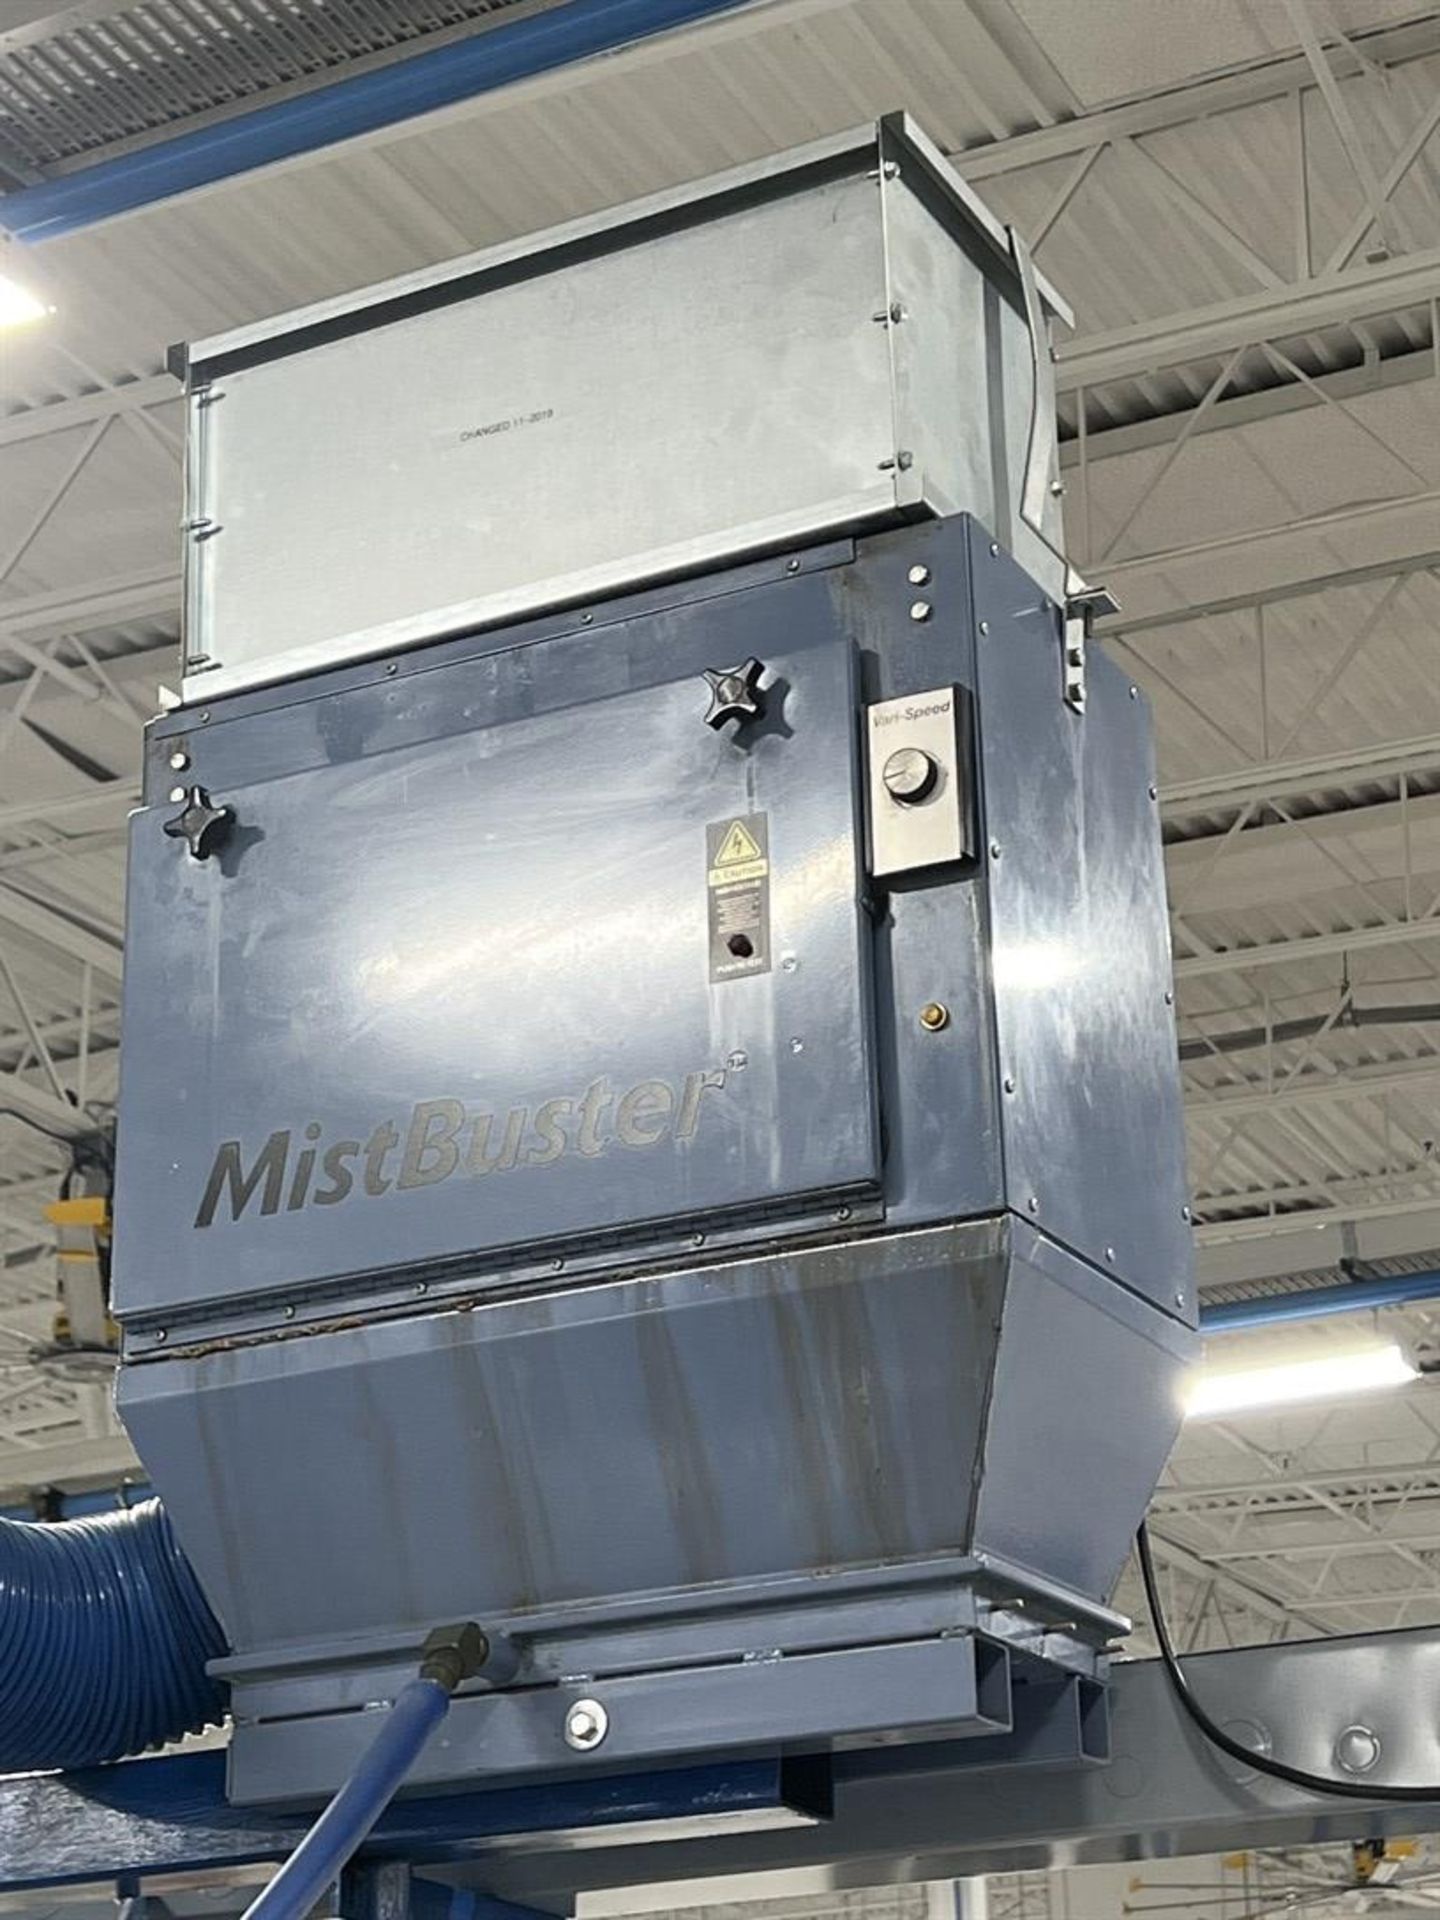 AIR QUALITY ENGINEERING Mistbuster 500 Air Cleaning System